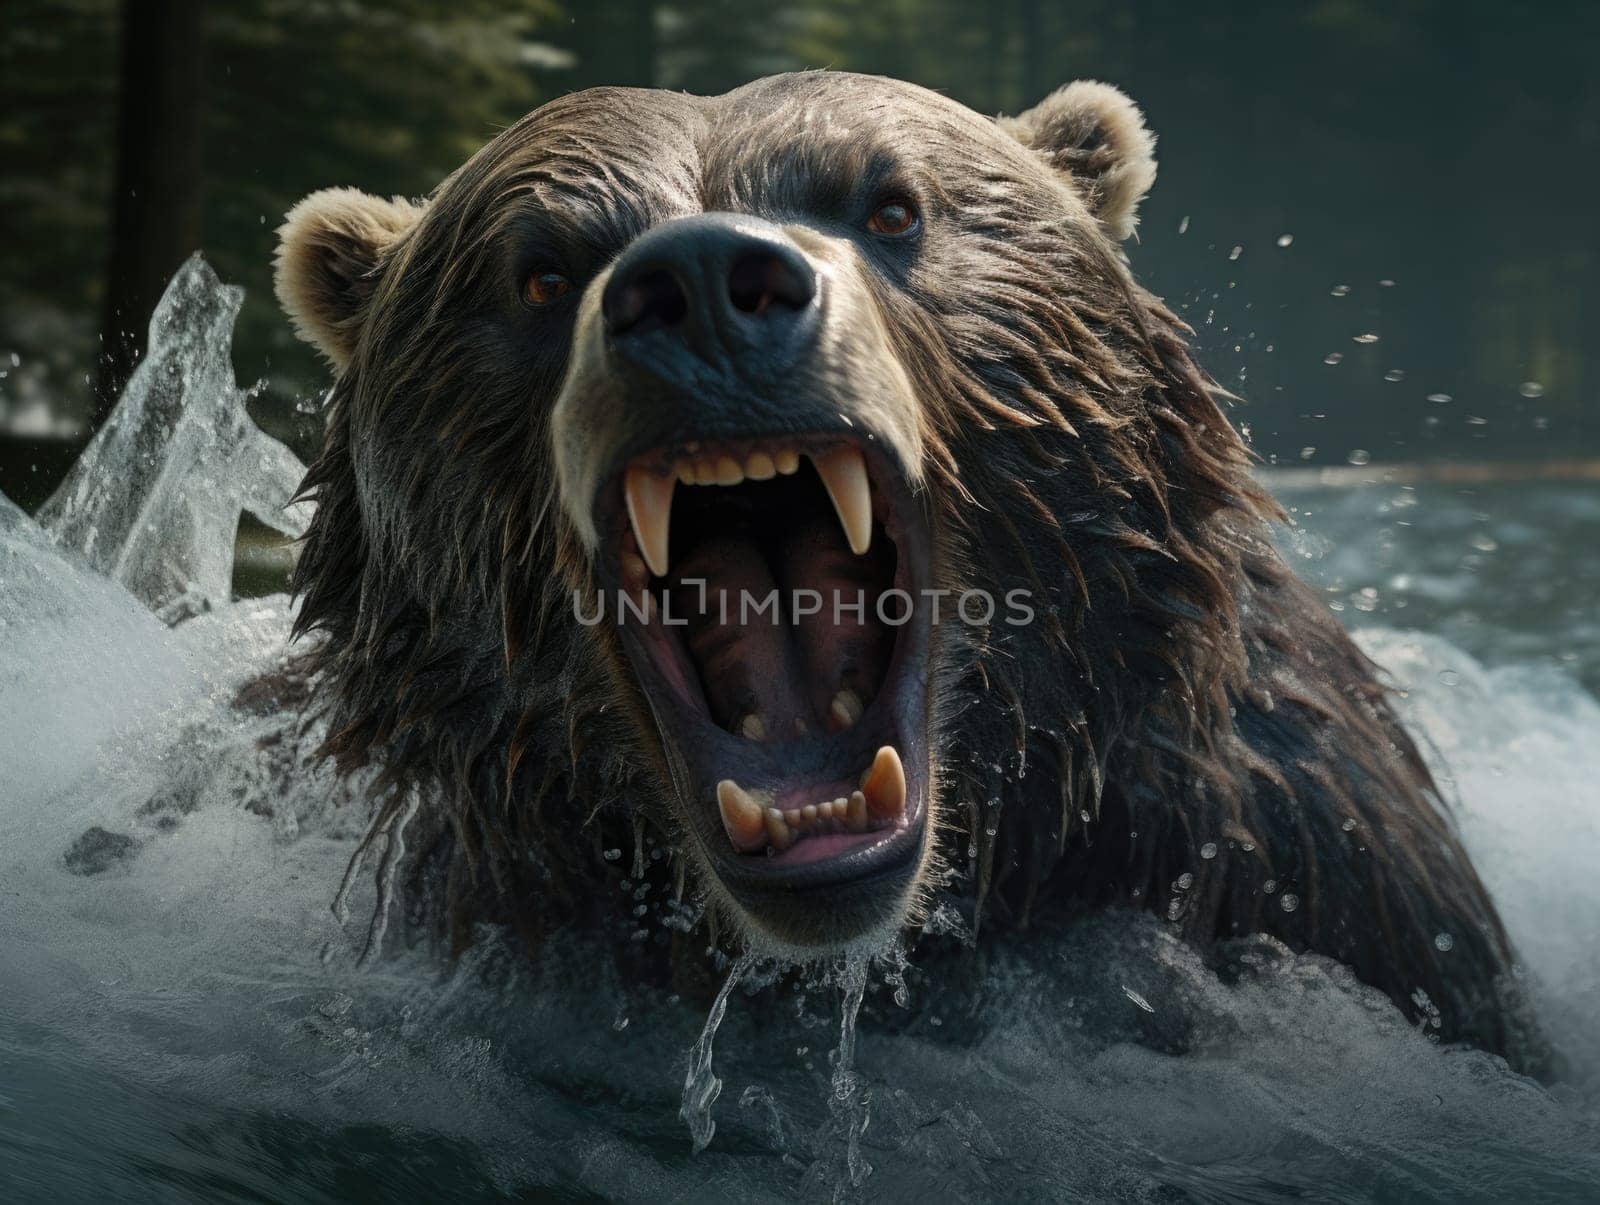 A bear is swimming in the water with its mouth wide open.